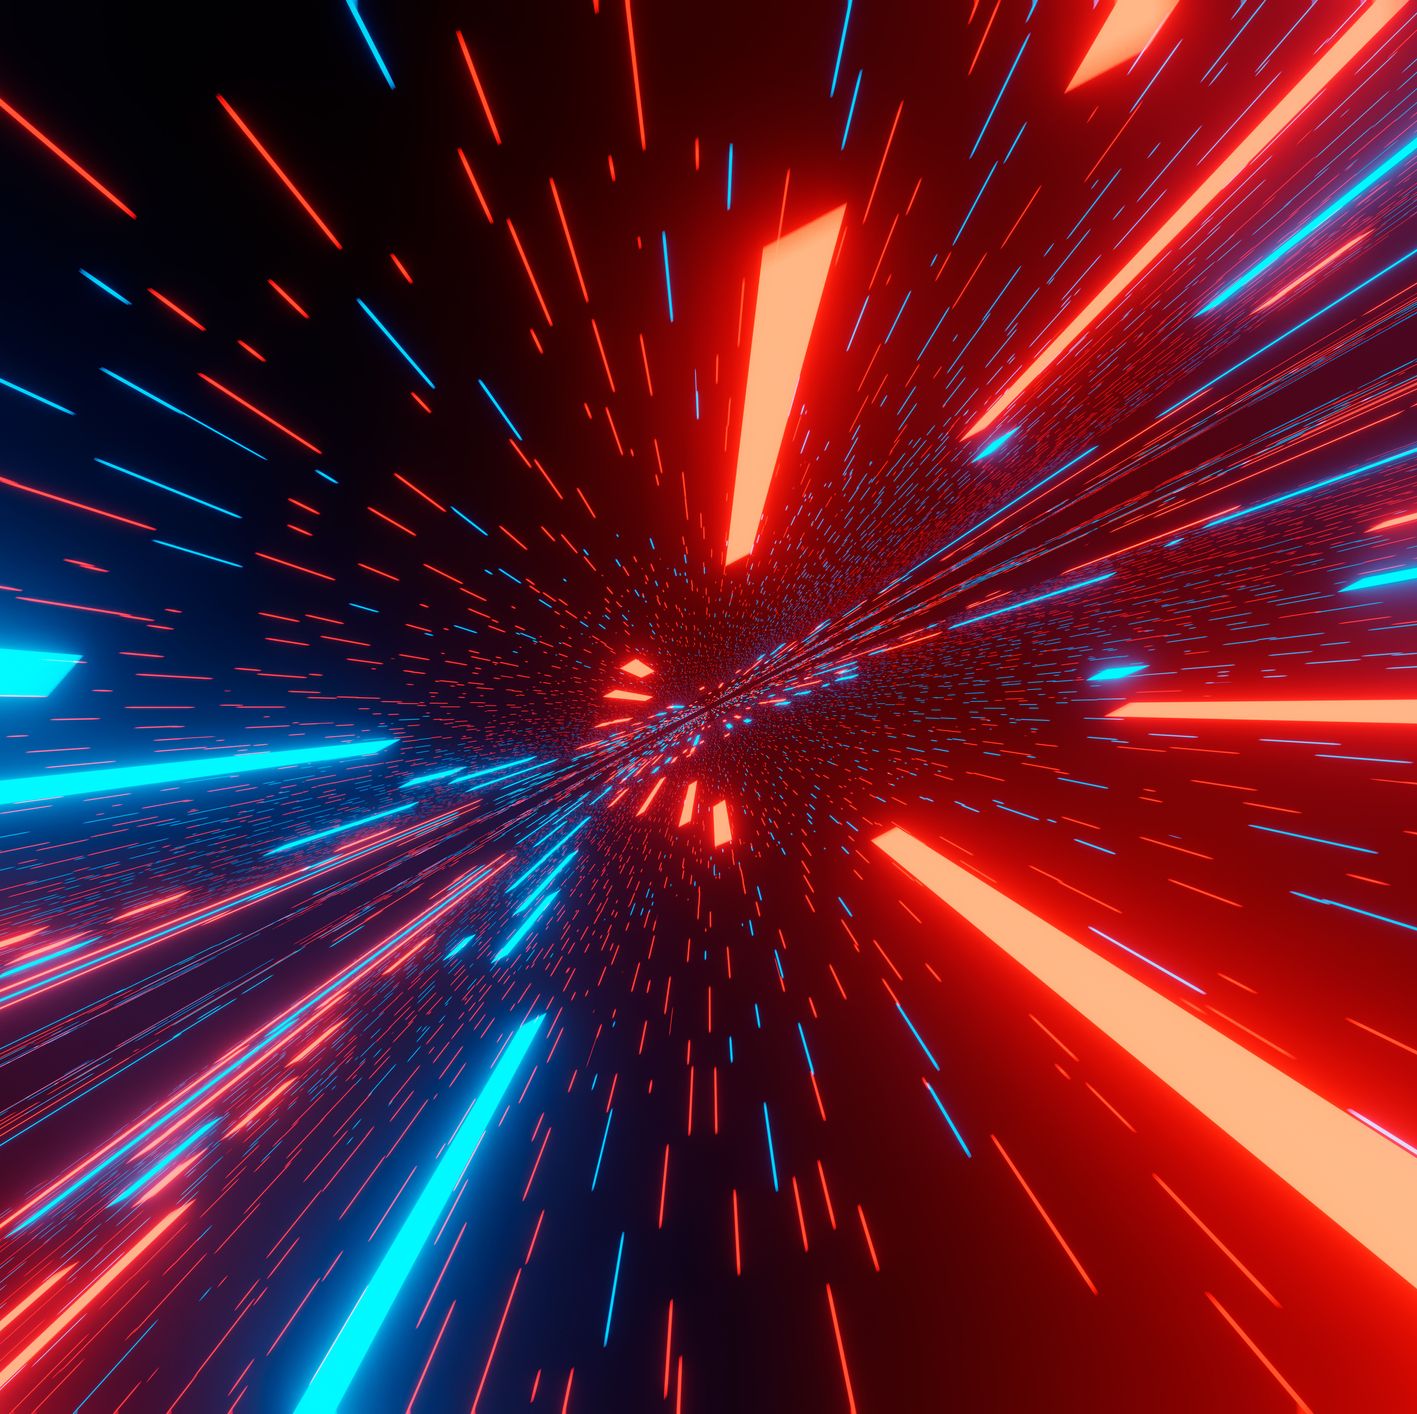 The World Just Moved Even Closer to a Real, Working Warp Drive